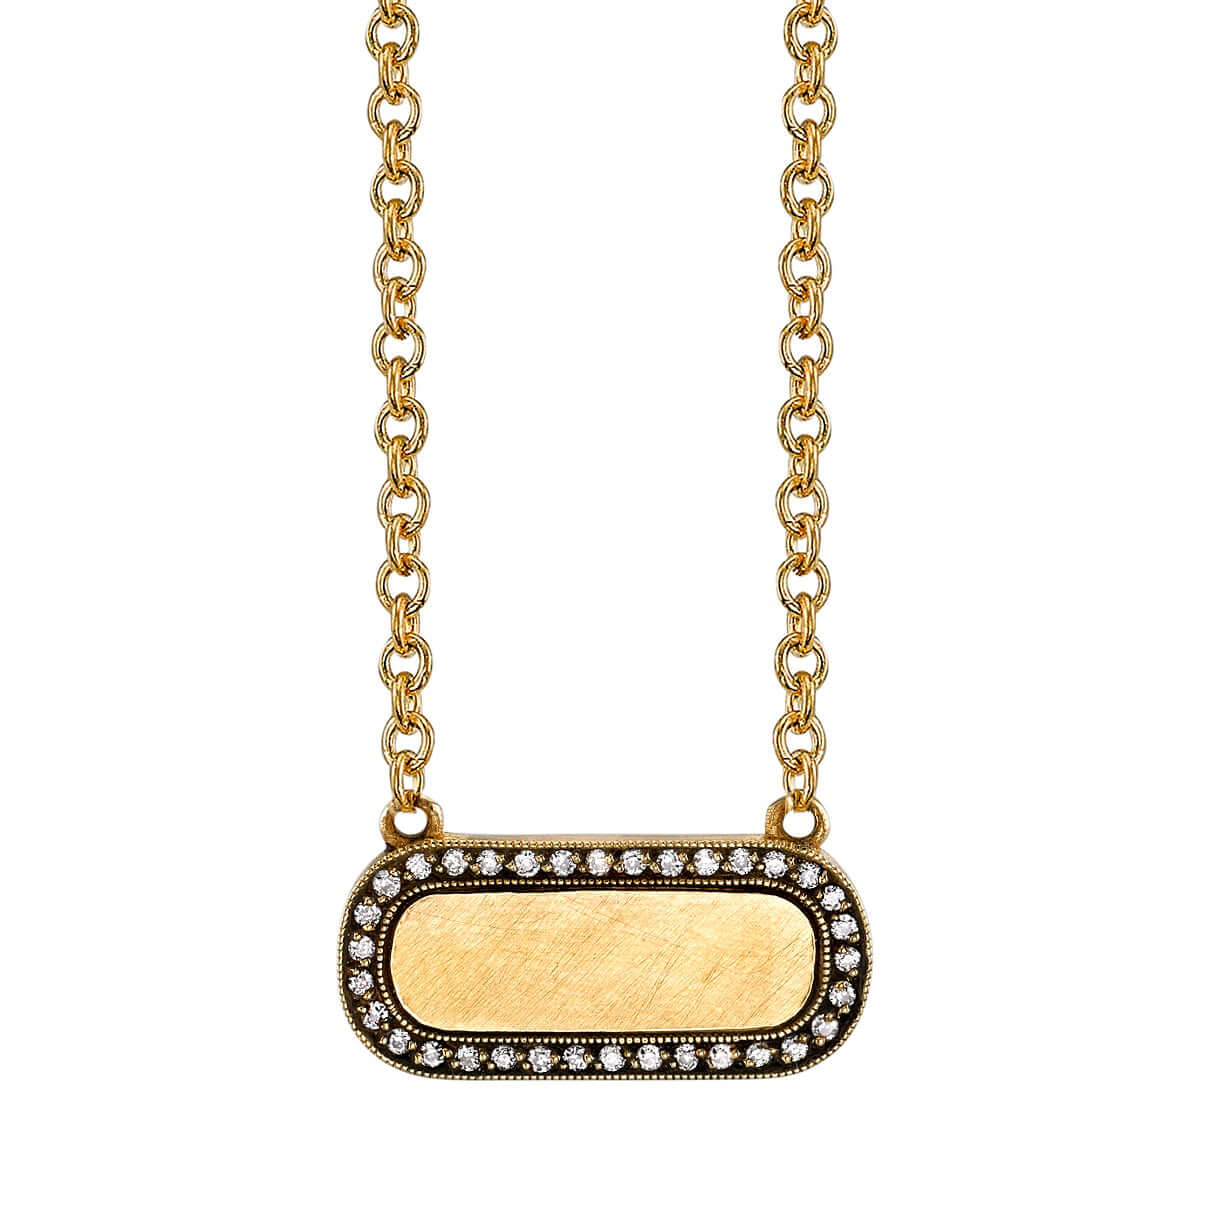 SINGLE STONE MILO NECKLACE featuring Vintage inspired yellow gold bar necklace. Necklace measures 17". Make it personal! Price includes monogrammed engraving of up to three letters in any of the styles shown above - please be sure to specify before placin